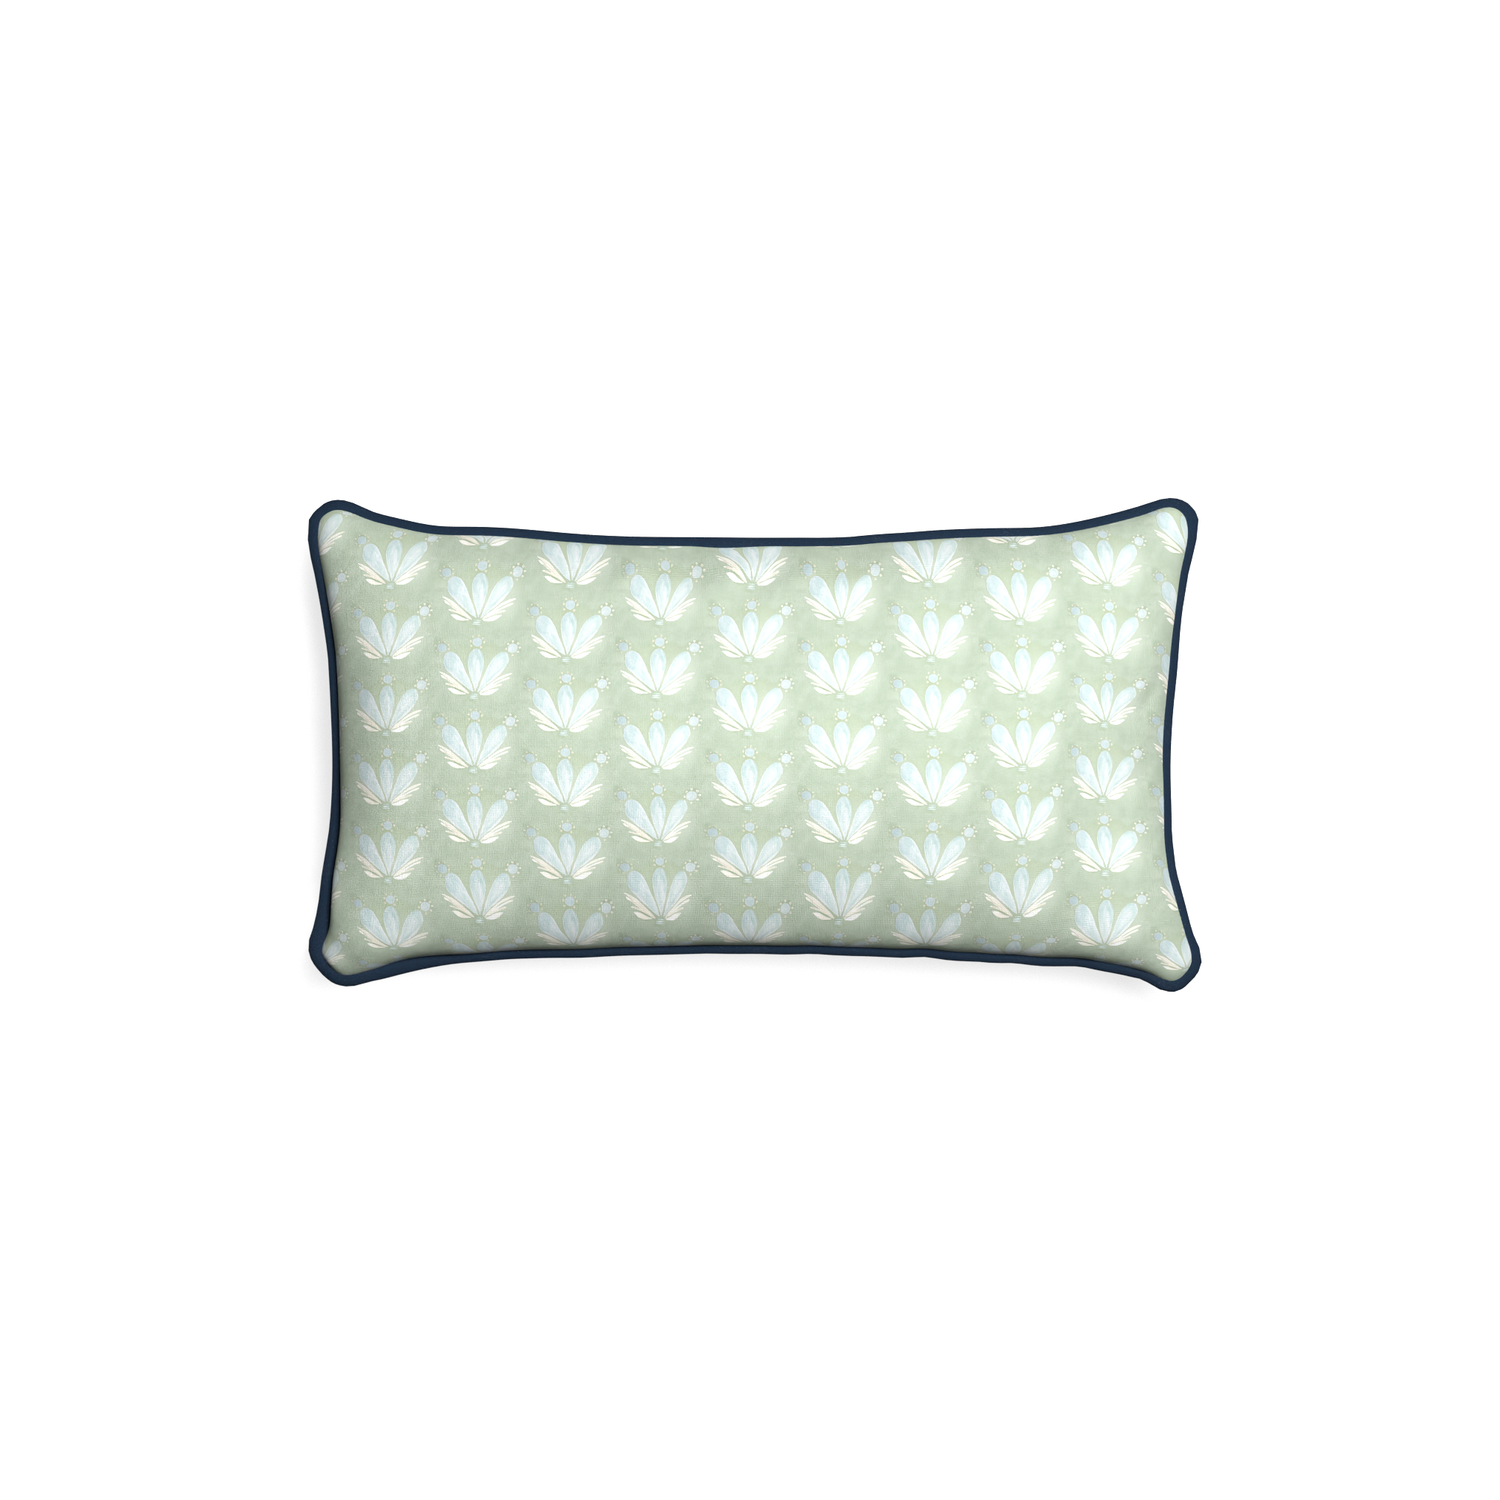 Petite-lumbar serena sea salt custom blue & green floral drop repeatpillow with c piping on white background